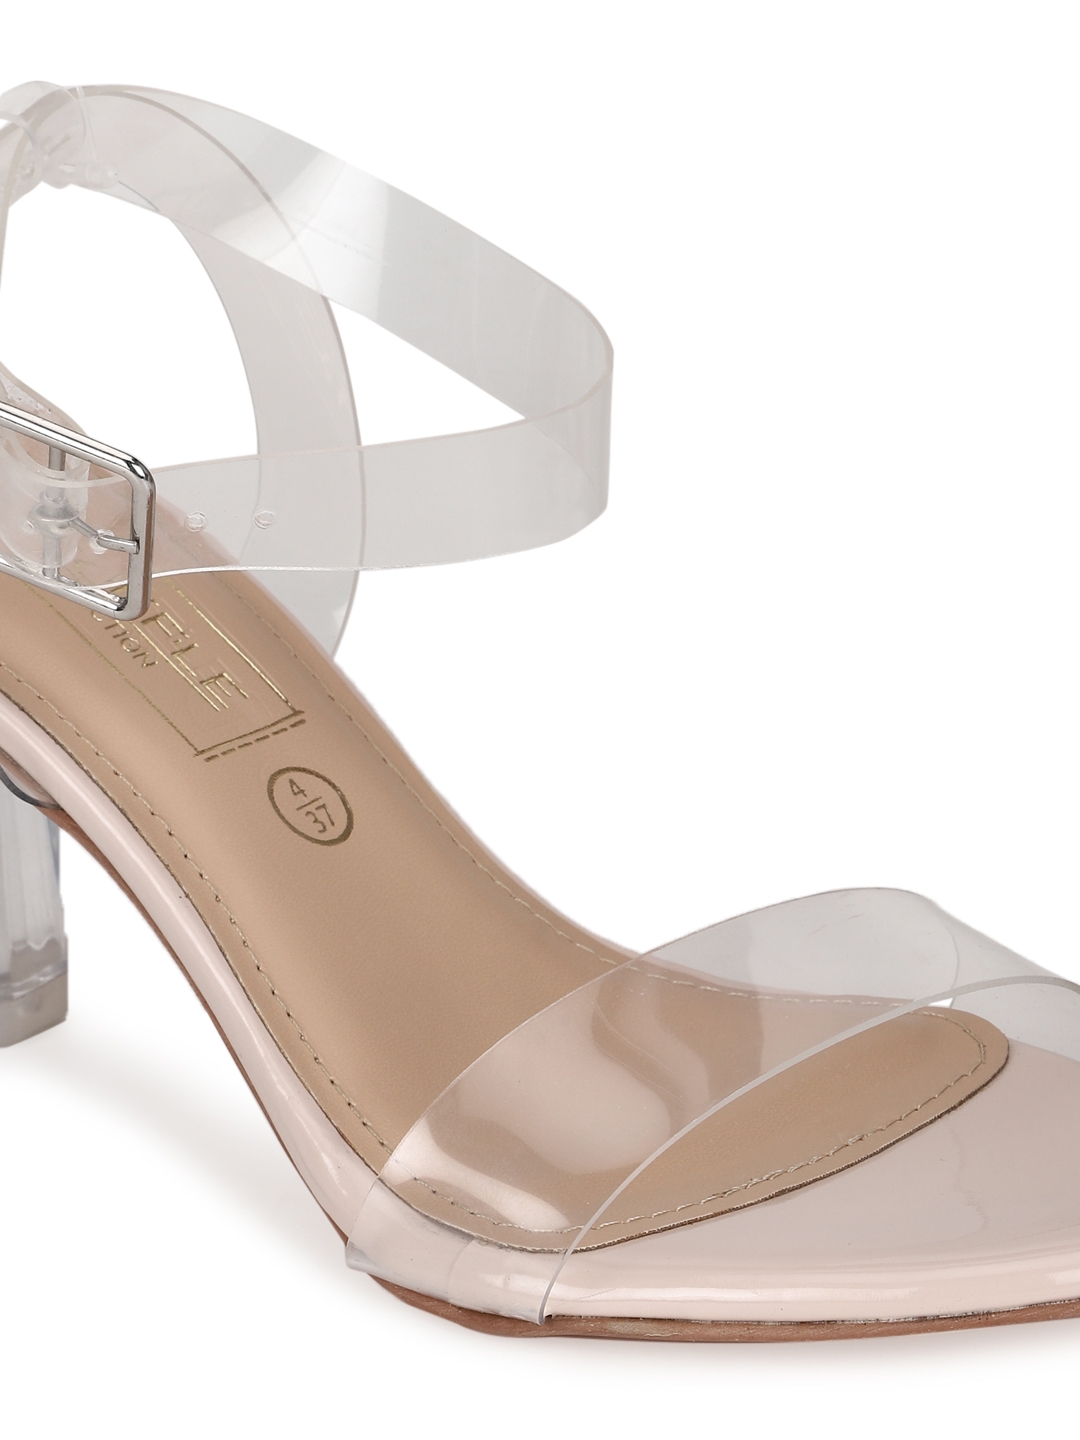 Nude Patent Perspex Clear Round Block Heels